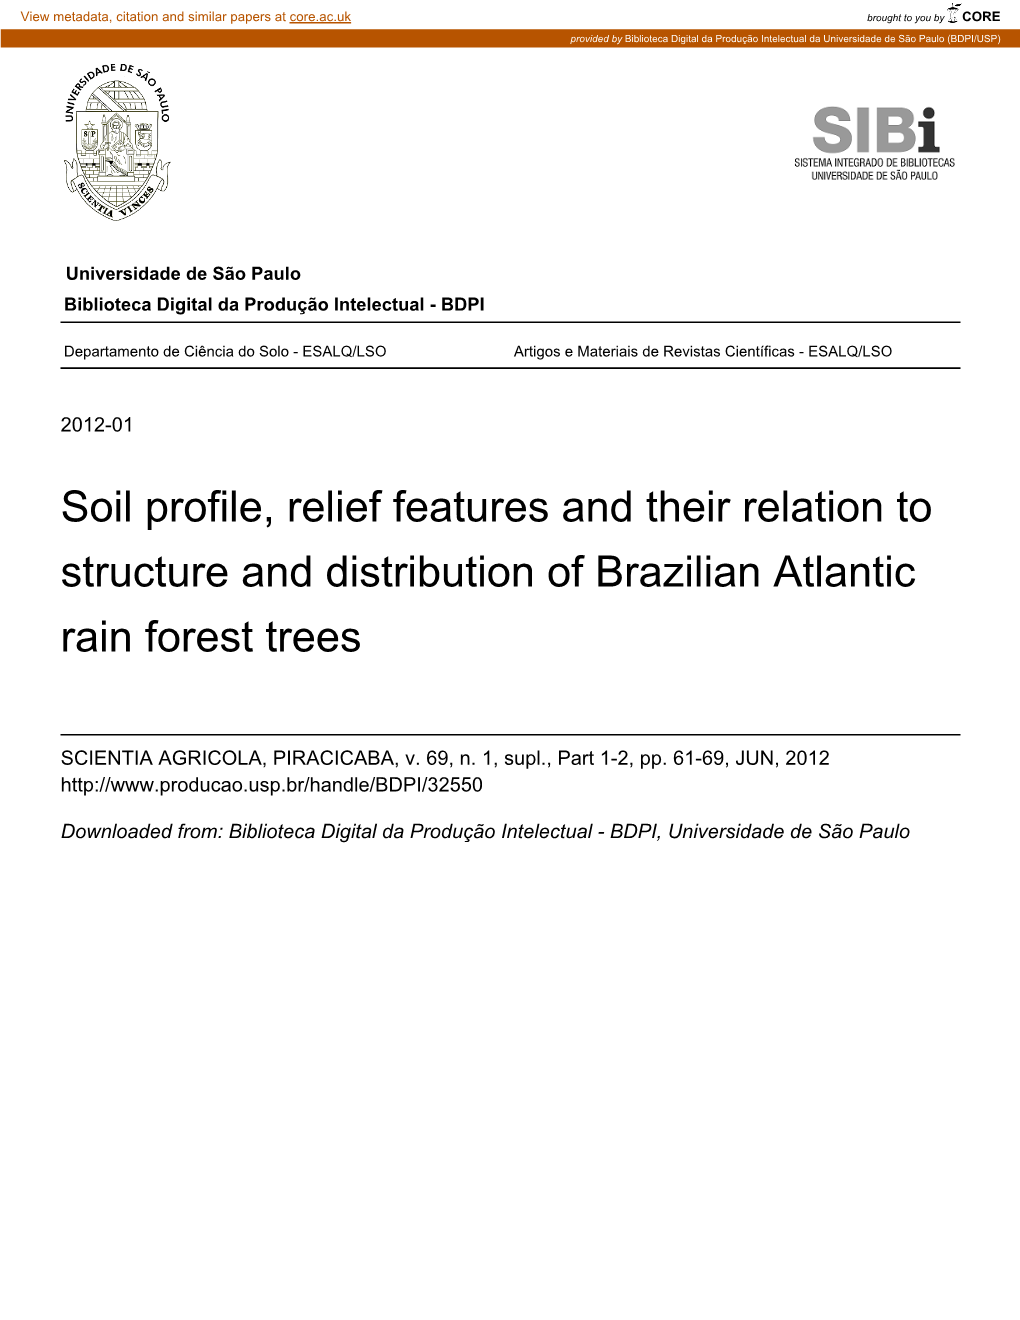 Soil Profile, Relief Features and Their Relation to Structure and Distribution of Brazilian Atlantic Rain Forest Trees